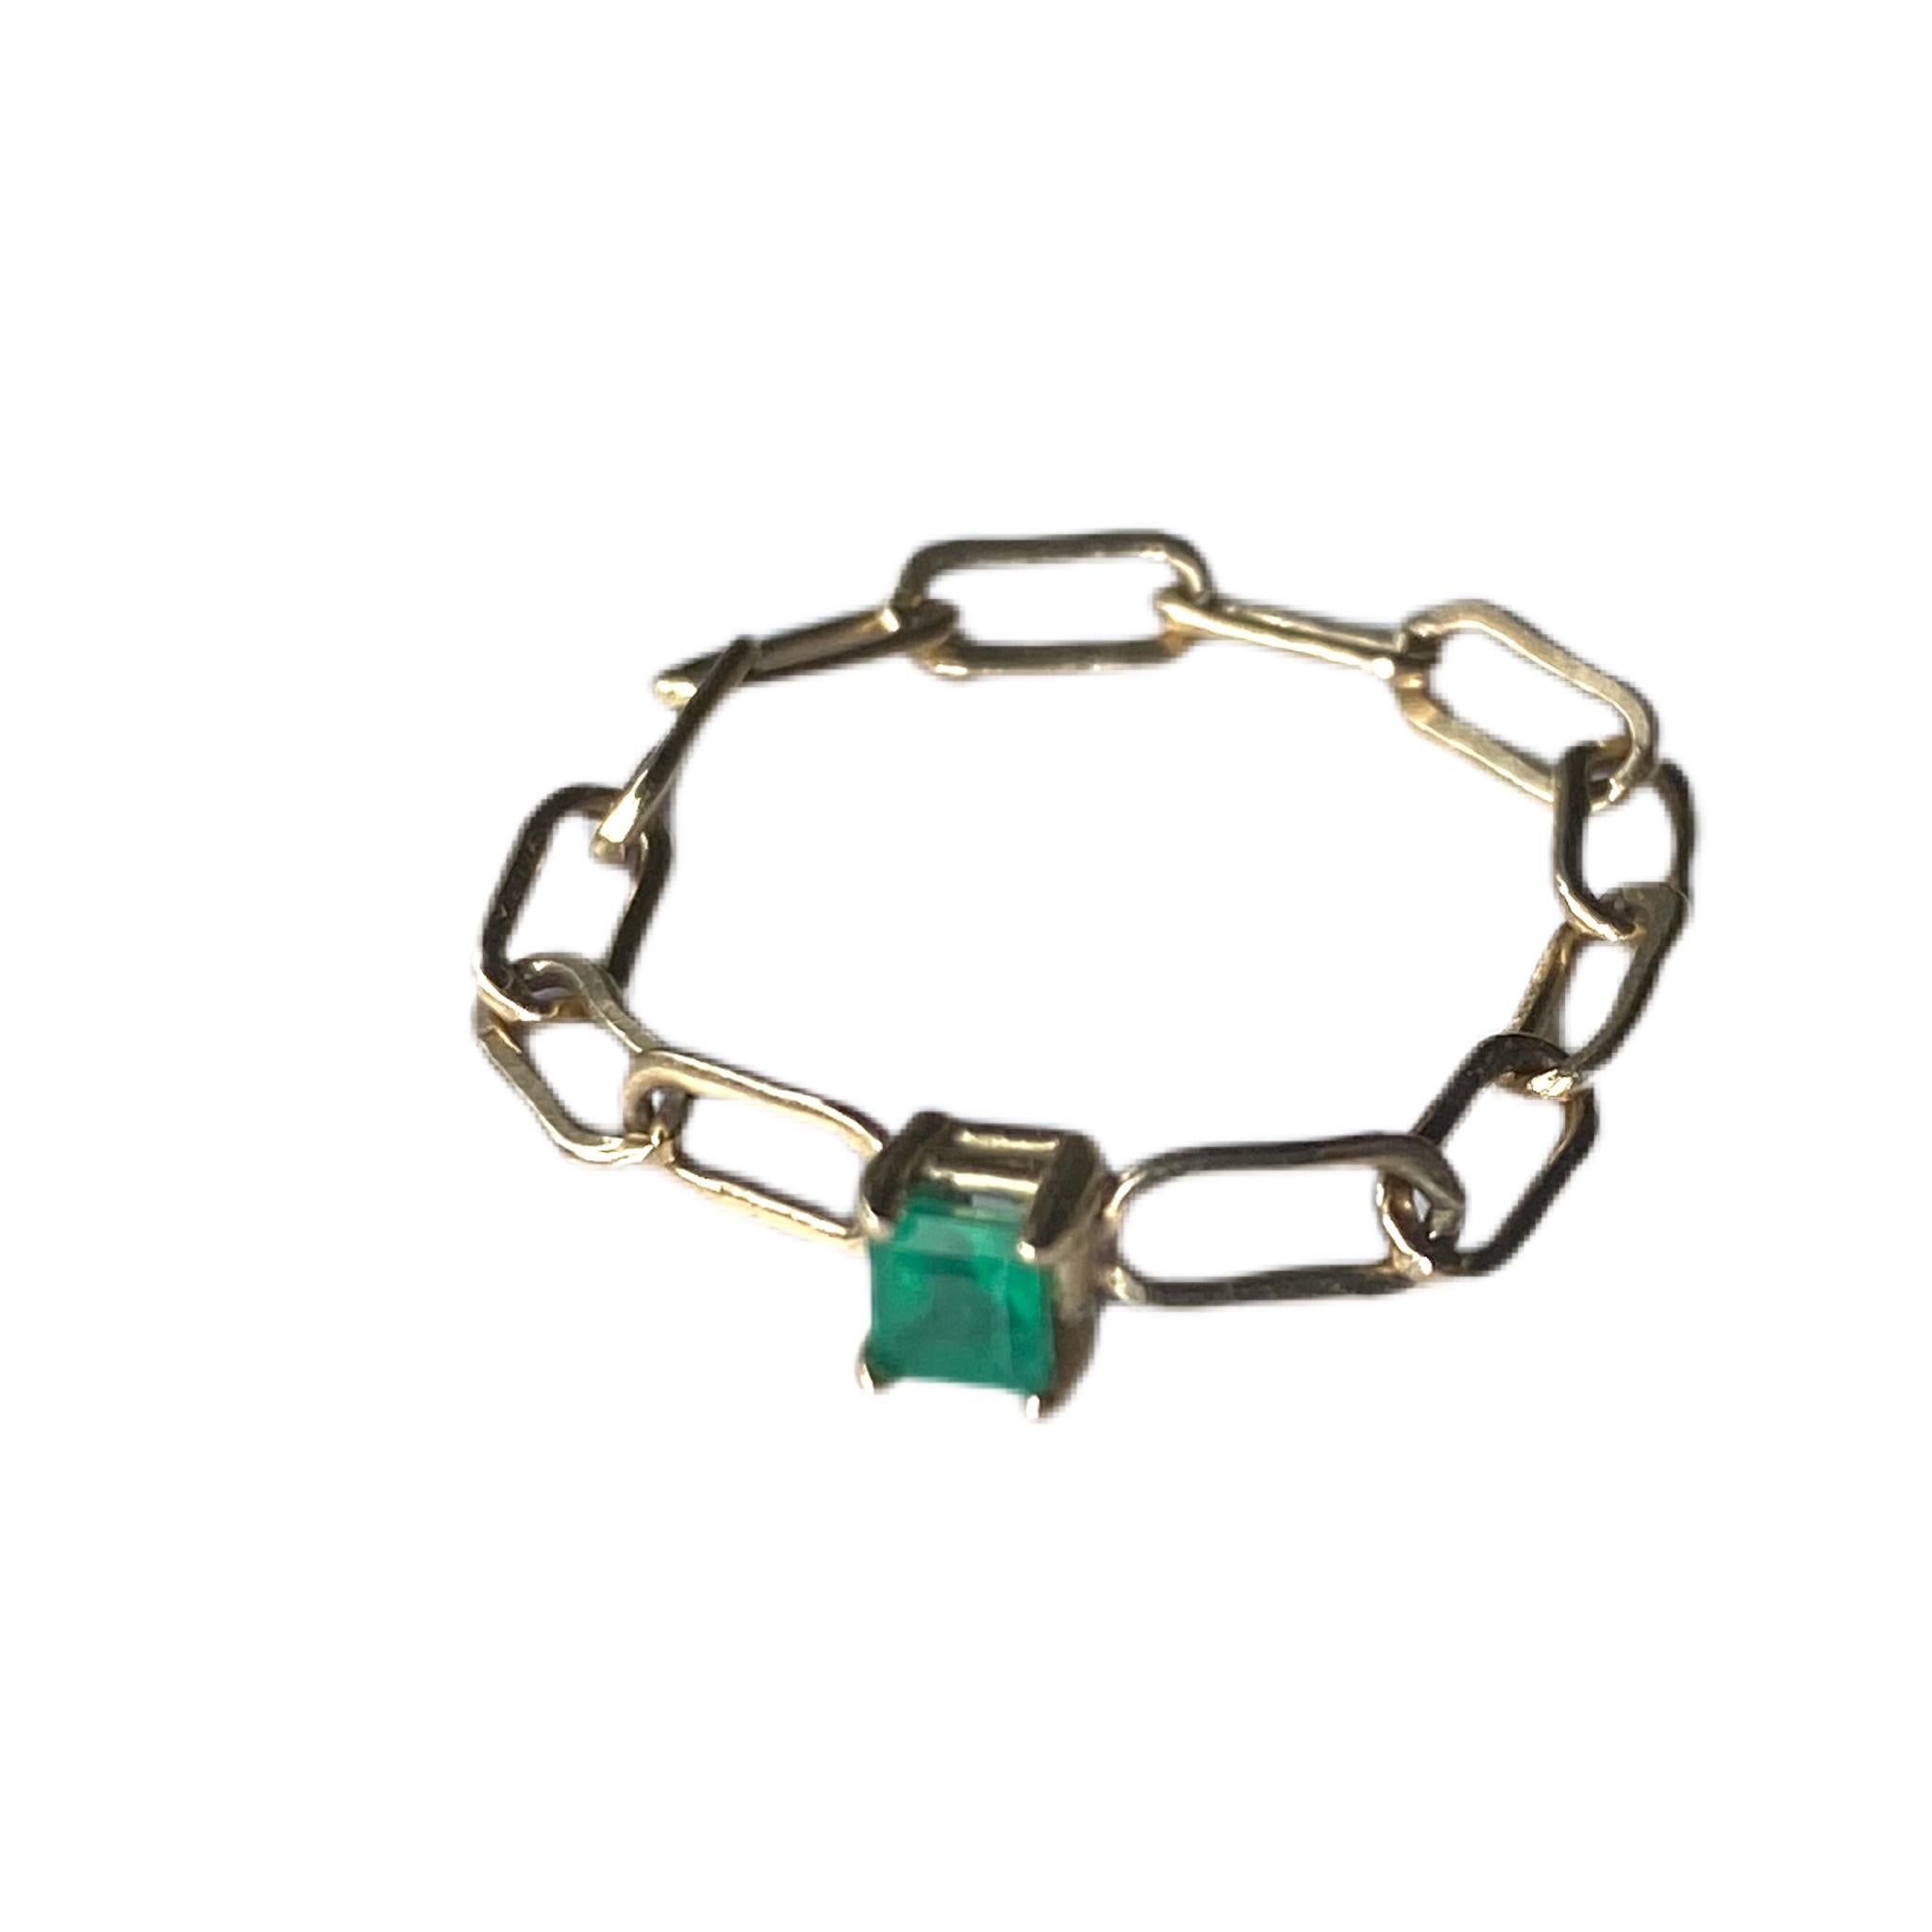 Emerald Square Cut Chain Ring 14K Gold J Dauphin

Made in Los Angeles

Last 4 images show same style with heart shaped gems Emerald, Tanzanite and Opal and a round Brilliant cut Alexandrite.

Available for immediate delivery